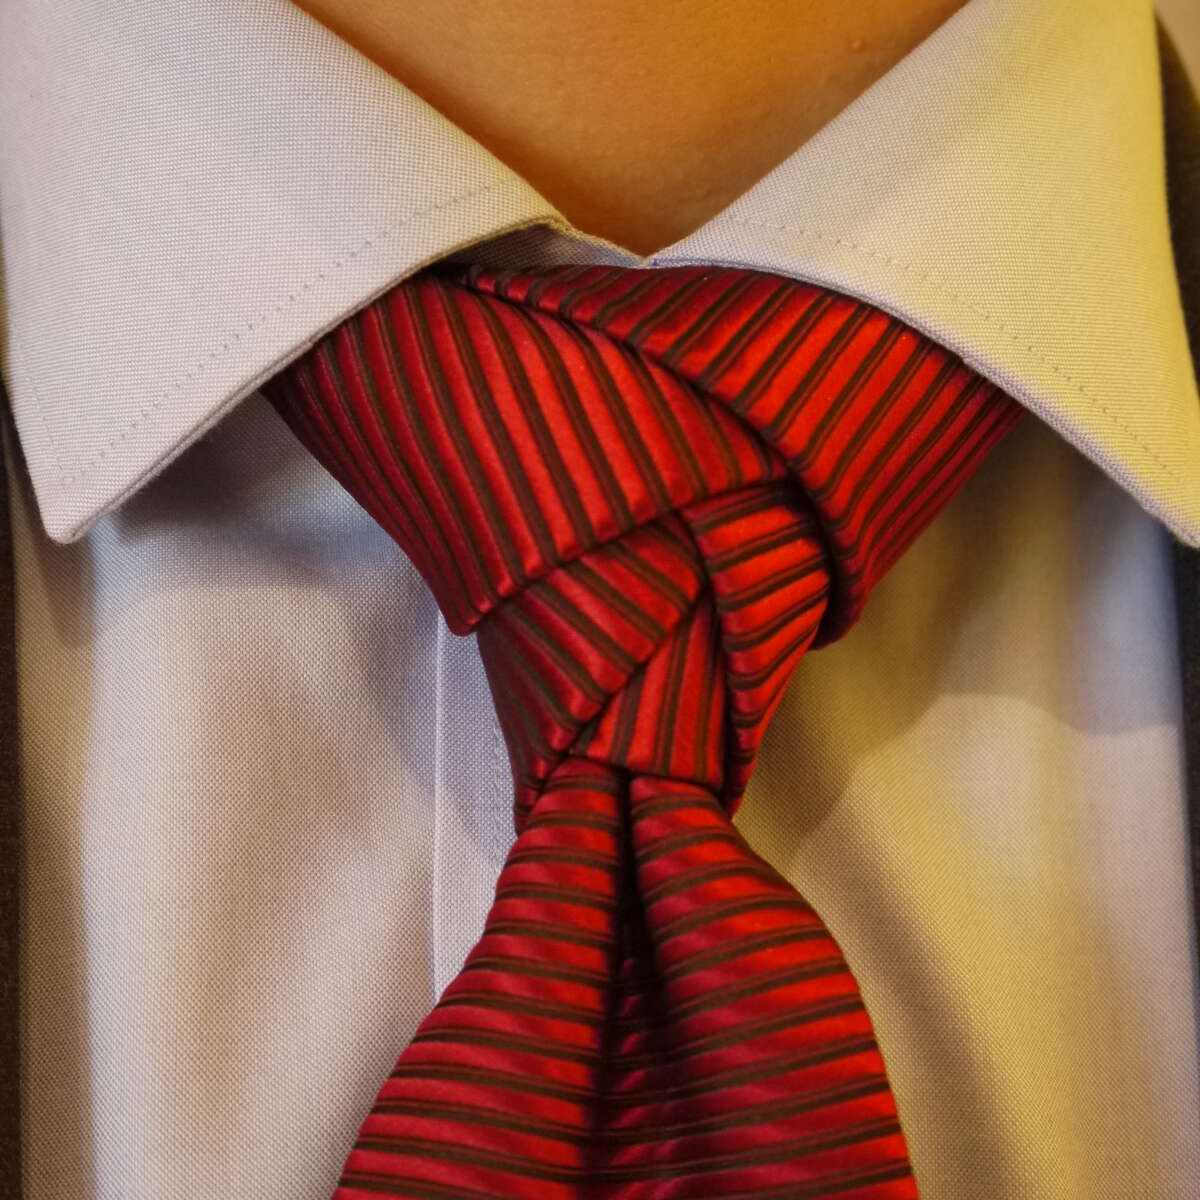 The 14-step tie knot that's all the rage